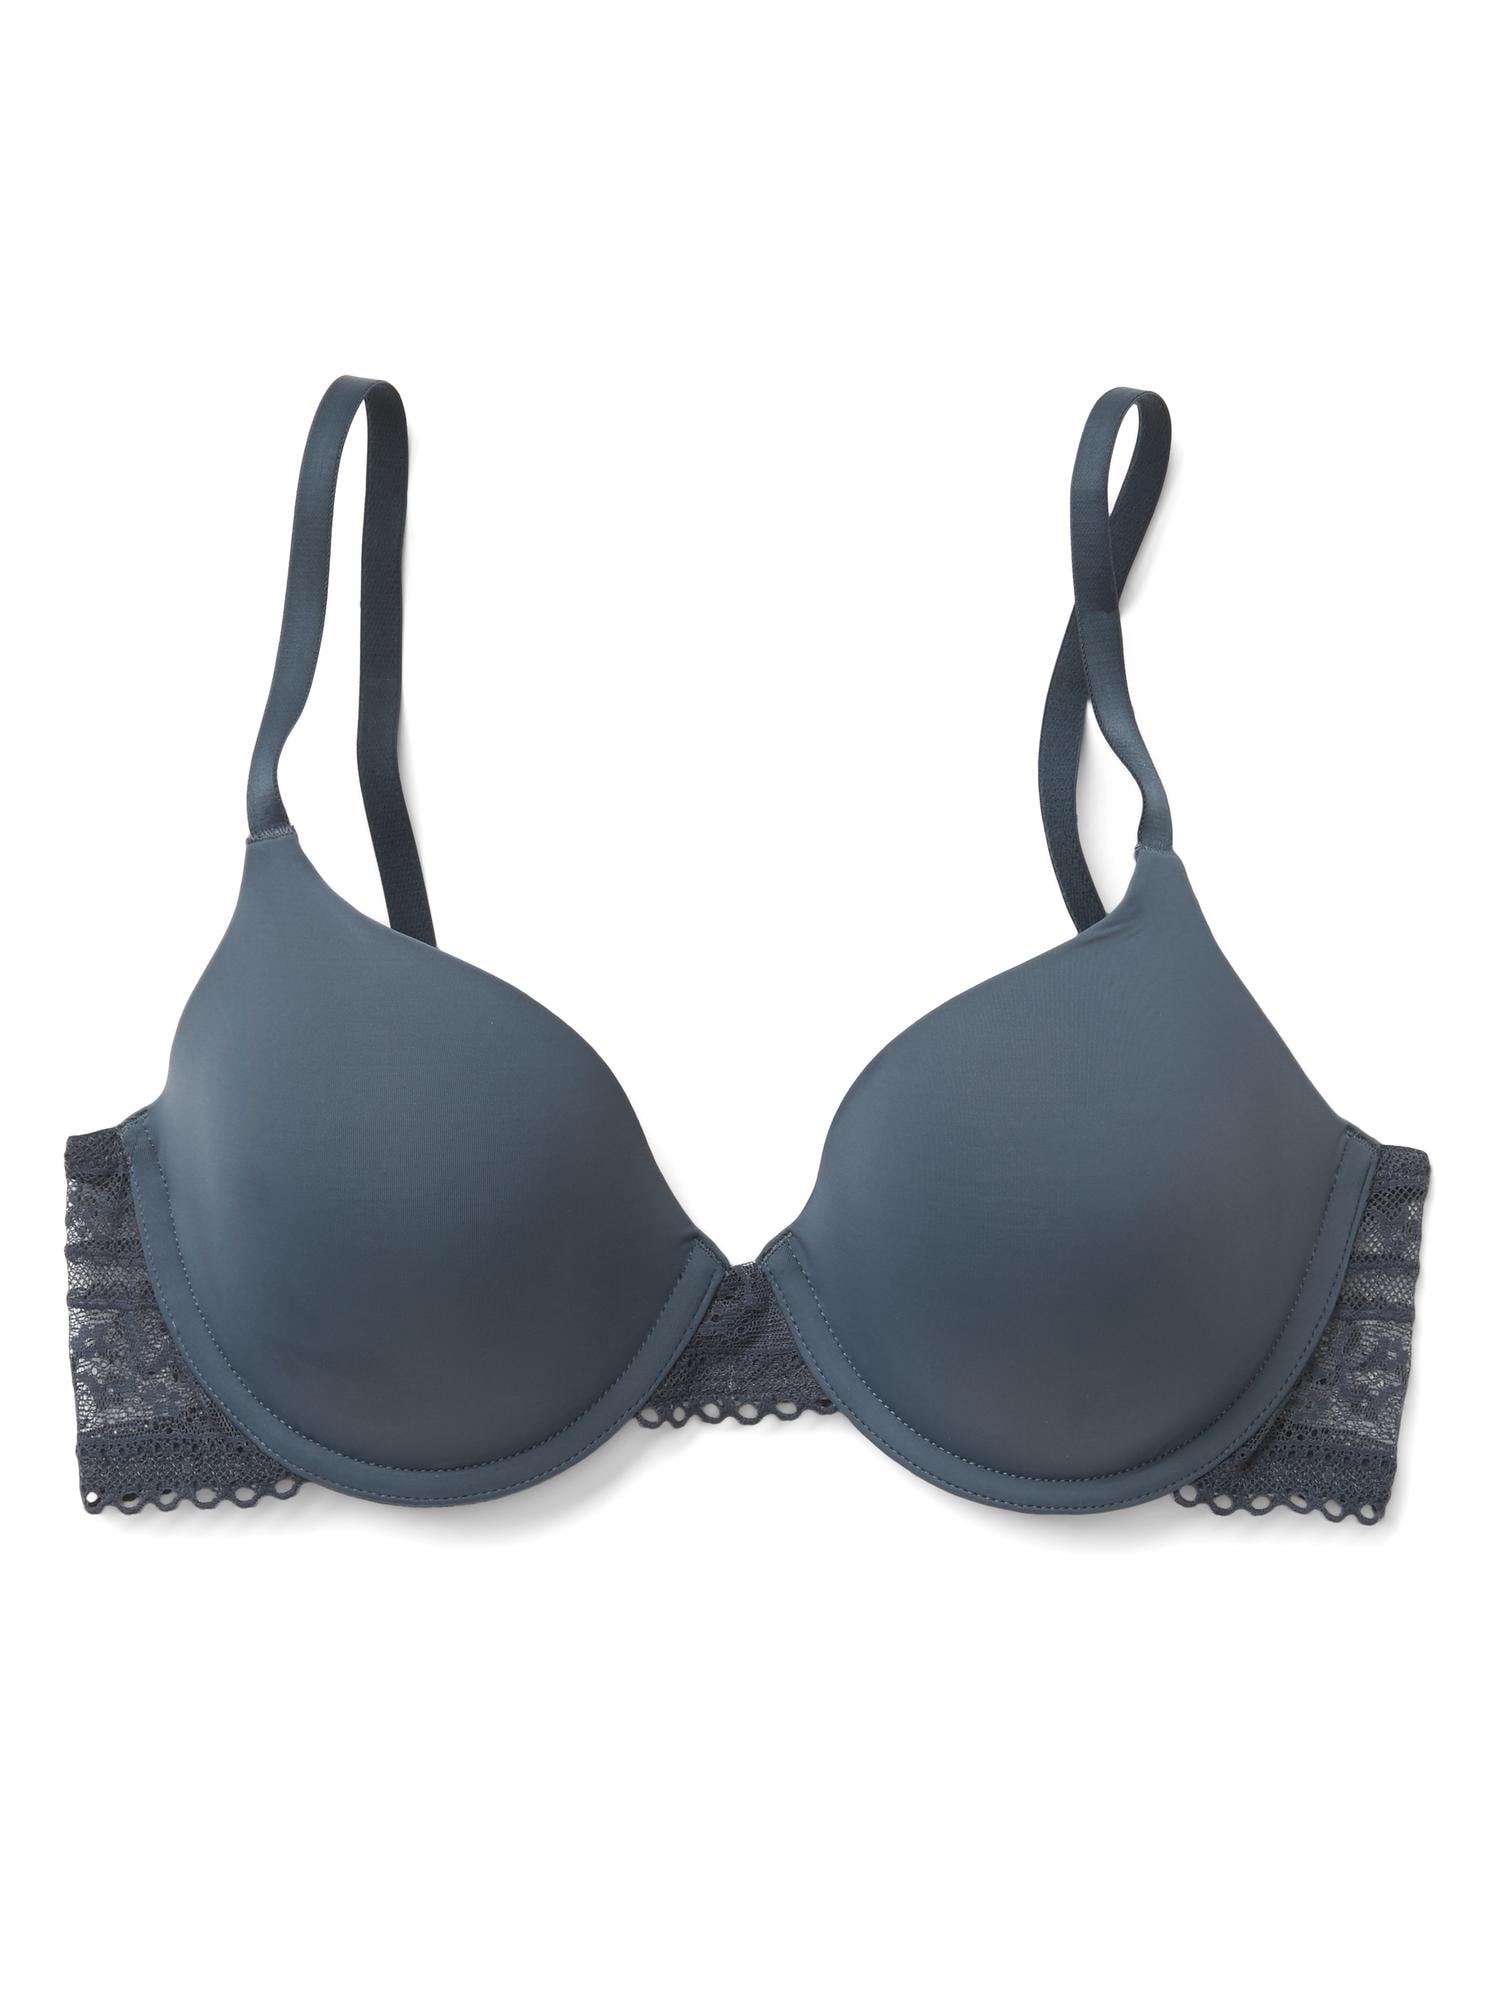 7.99 instead of 21.99 for a Seamless Lace Bras - save up to 64